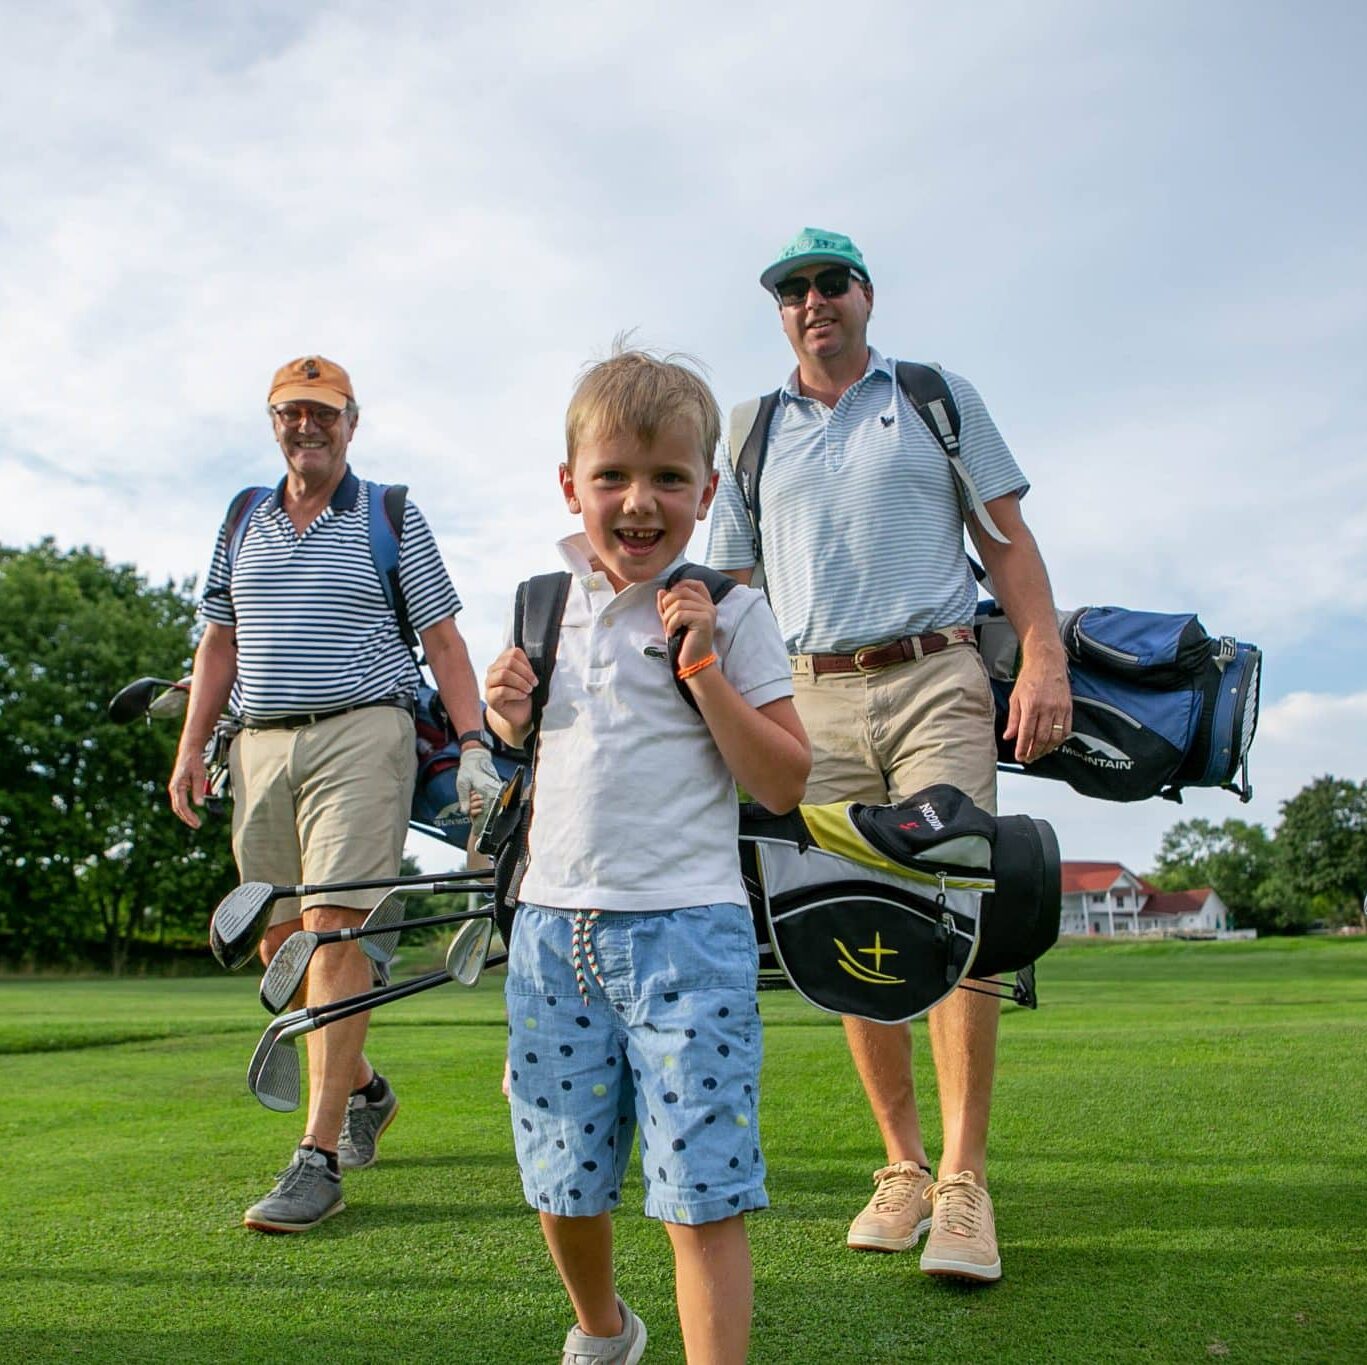 Three generations of golfers walking down fairway with gold bags on shoulders